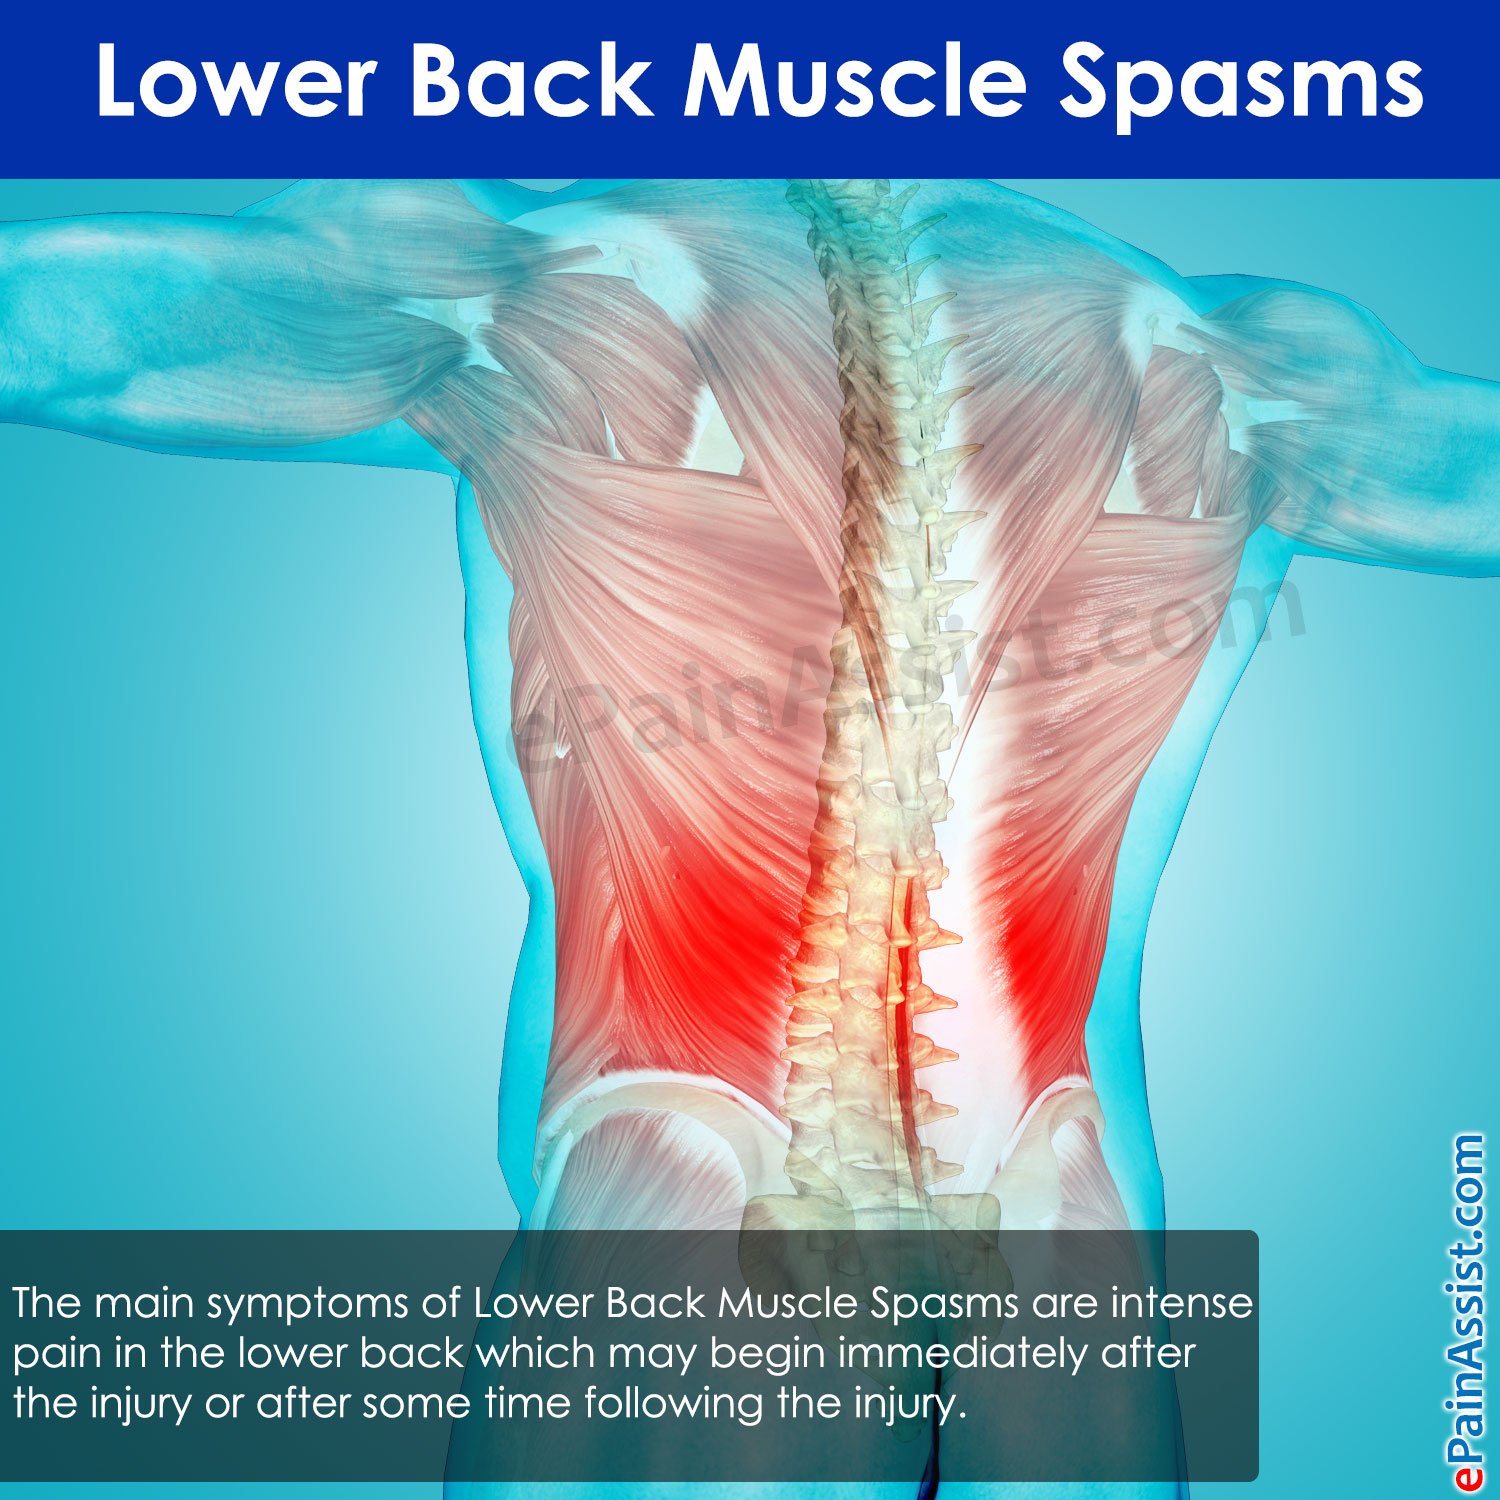 Why Is Muscle Spasms Legs And Back Considered Underrated?